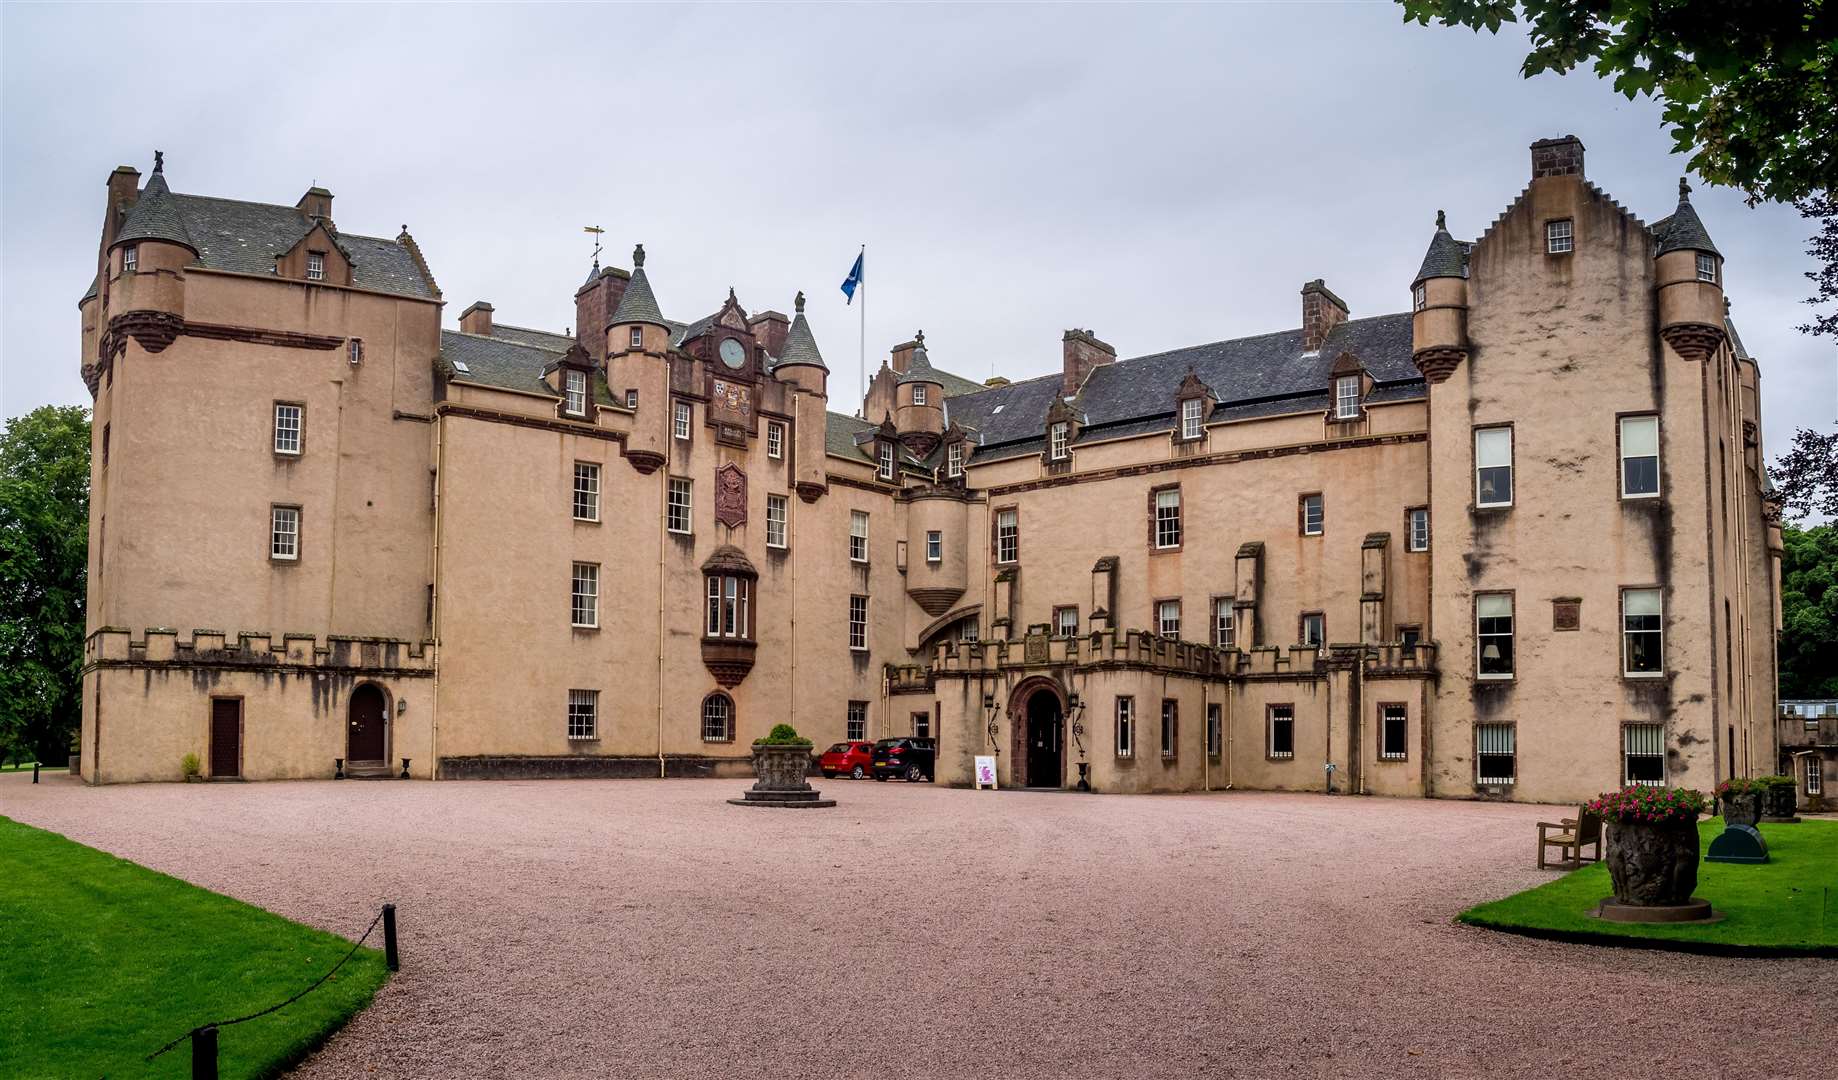 Fyvie Castle will offer free entry to Lottery ticket holders.